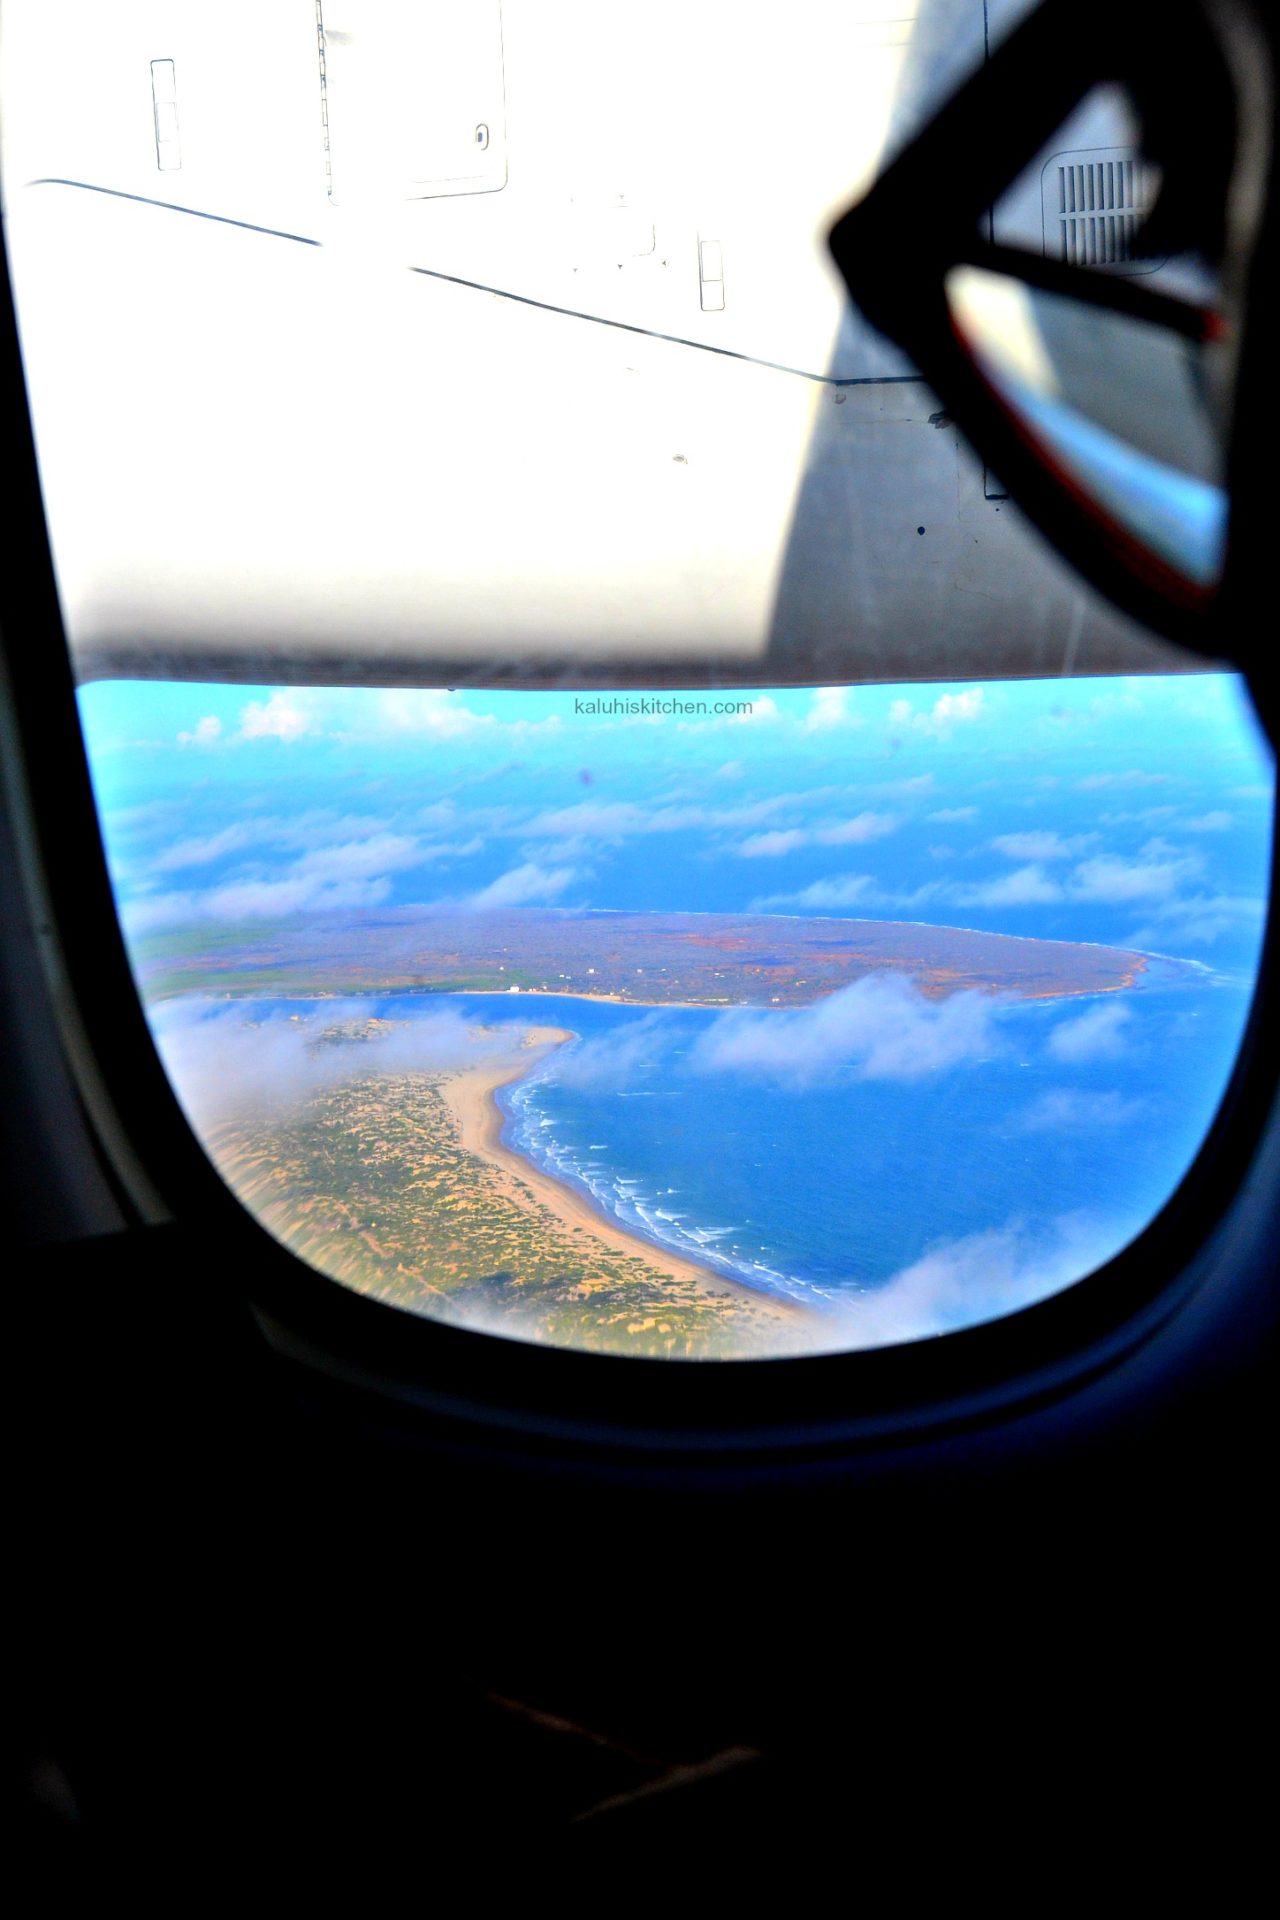 top food bloggers in kenya fly with flysax nairobi to lamu for attending the Lamu Food festival